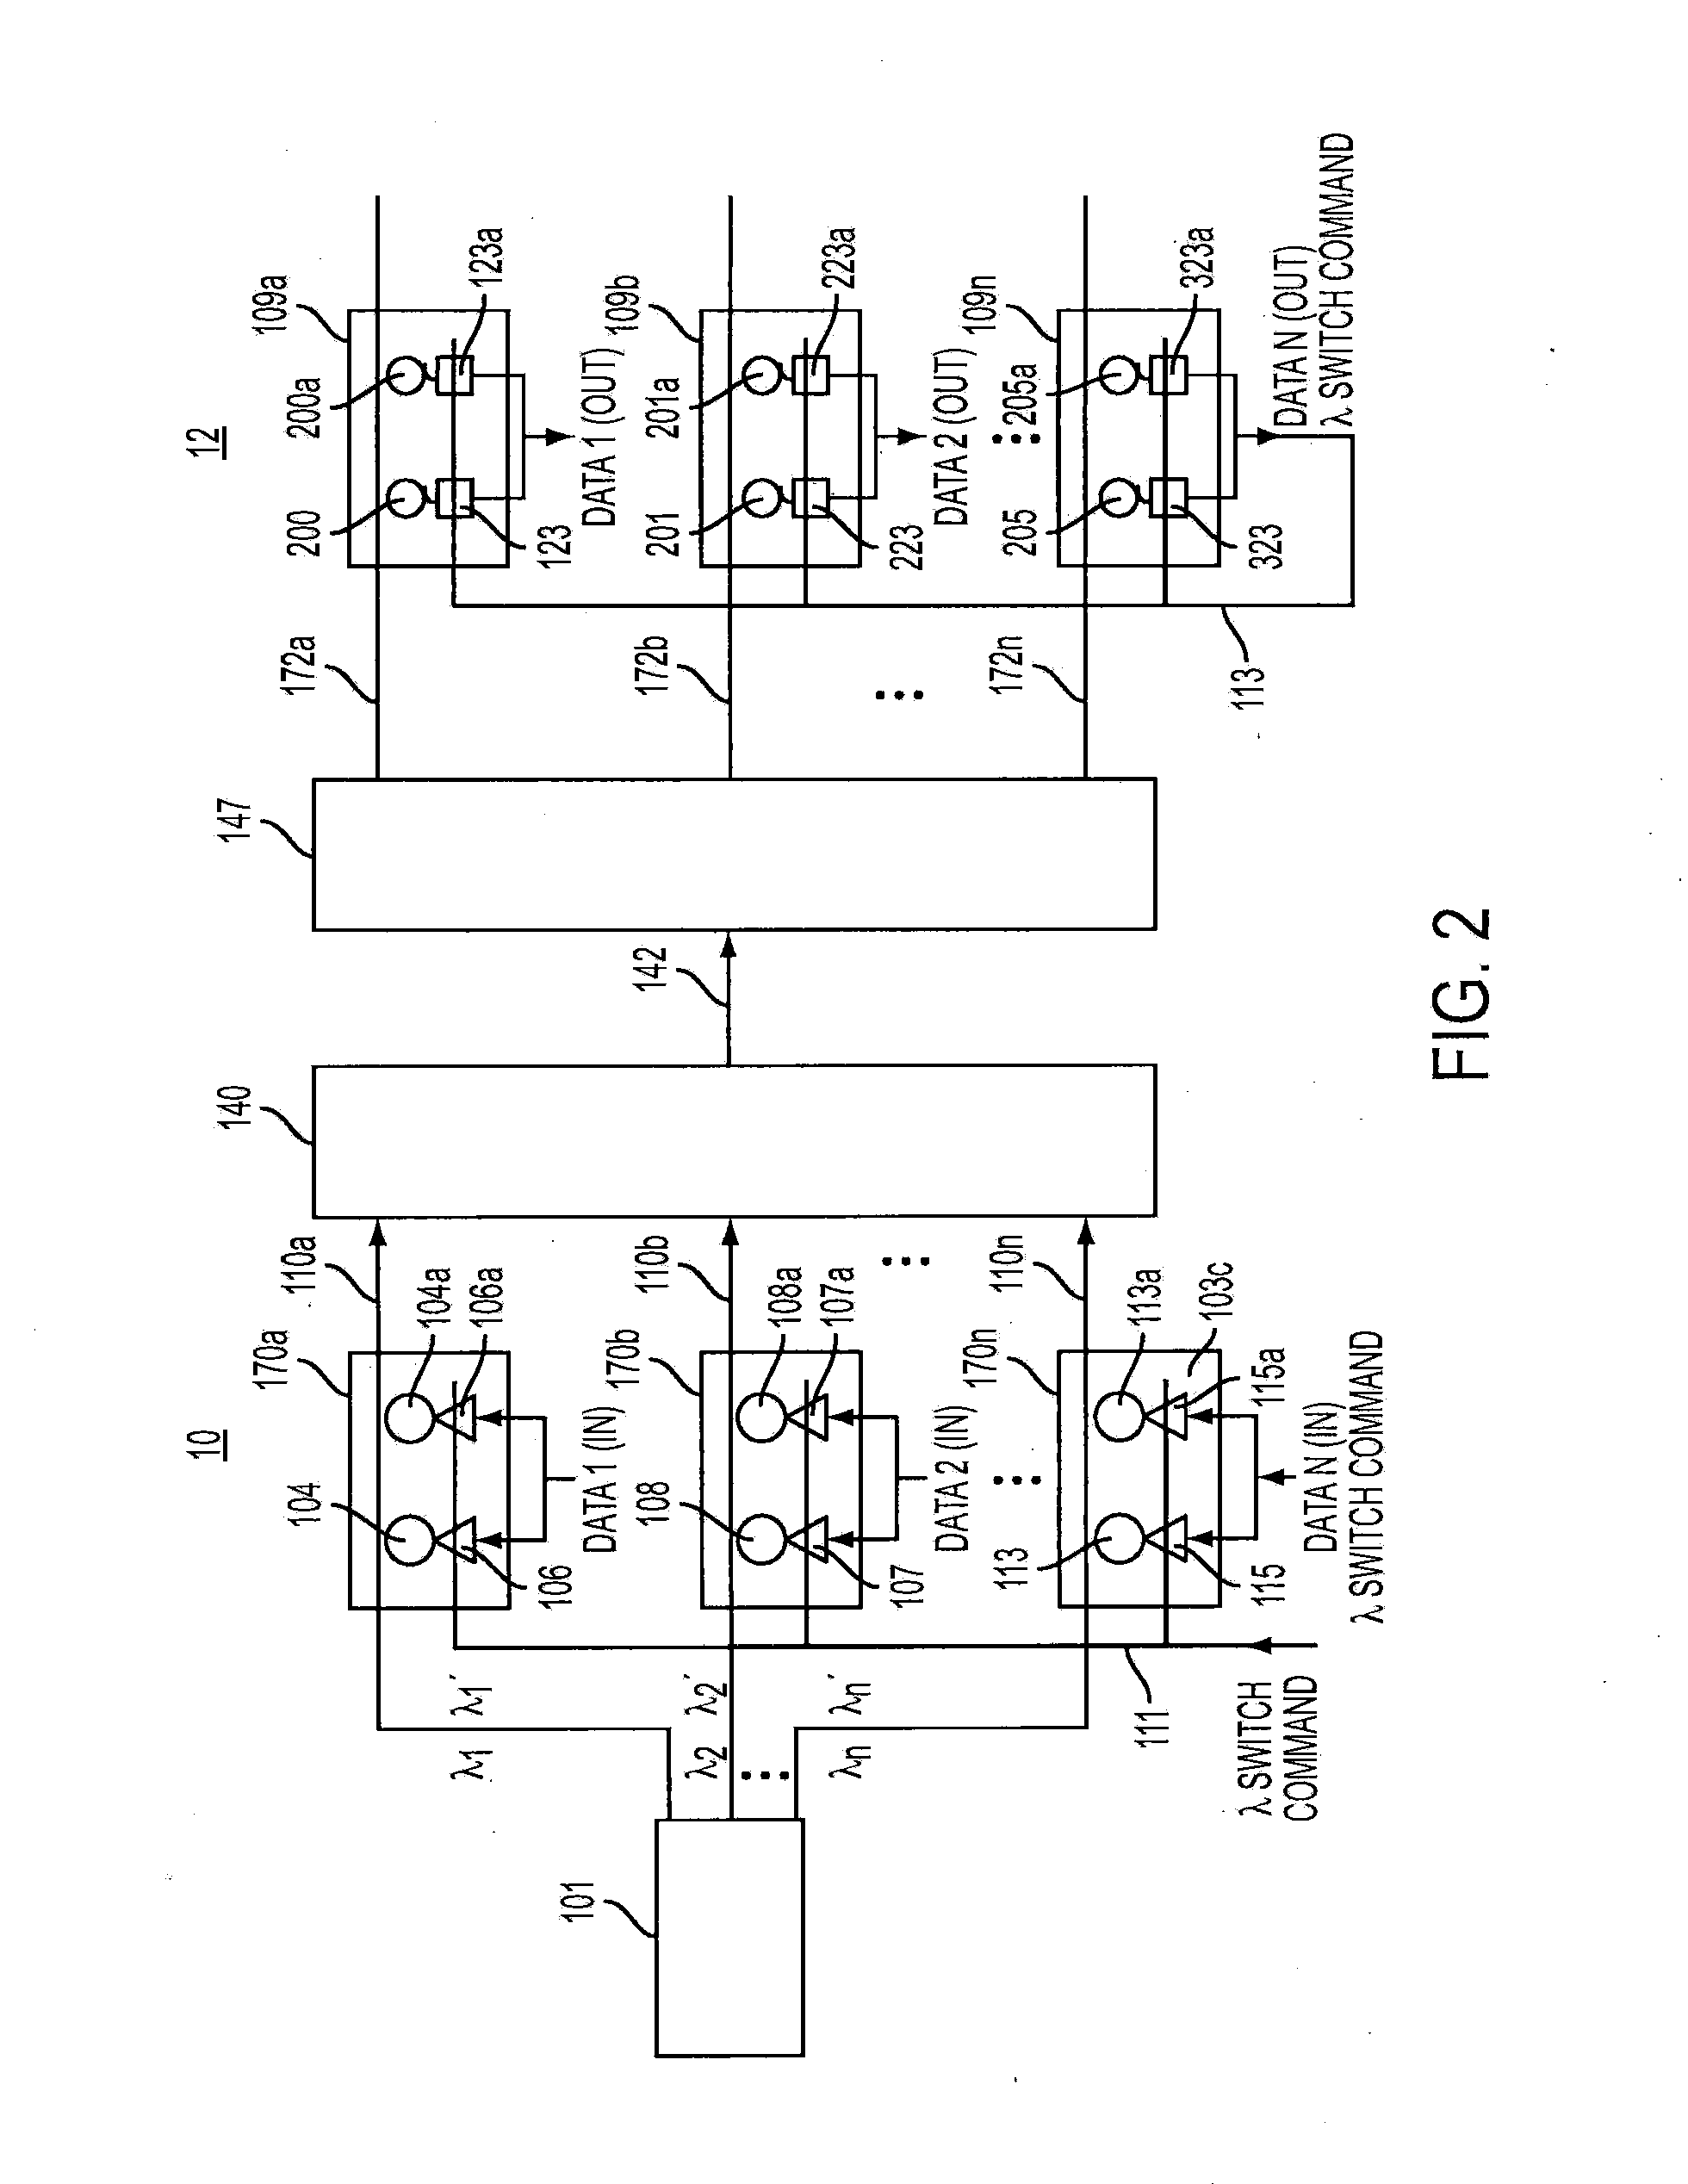 Method and apparatus providing wave division multiplexing optical communication system with active carrier hopping